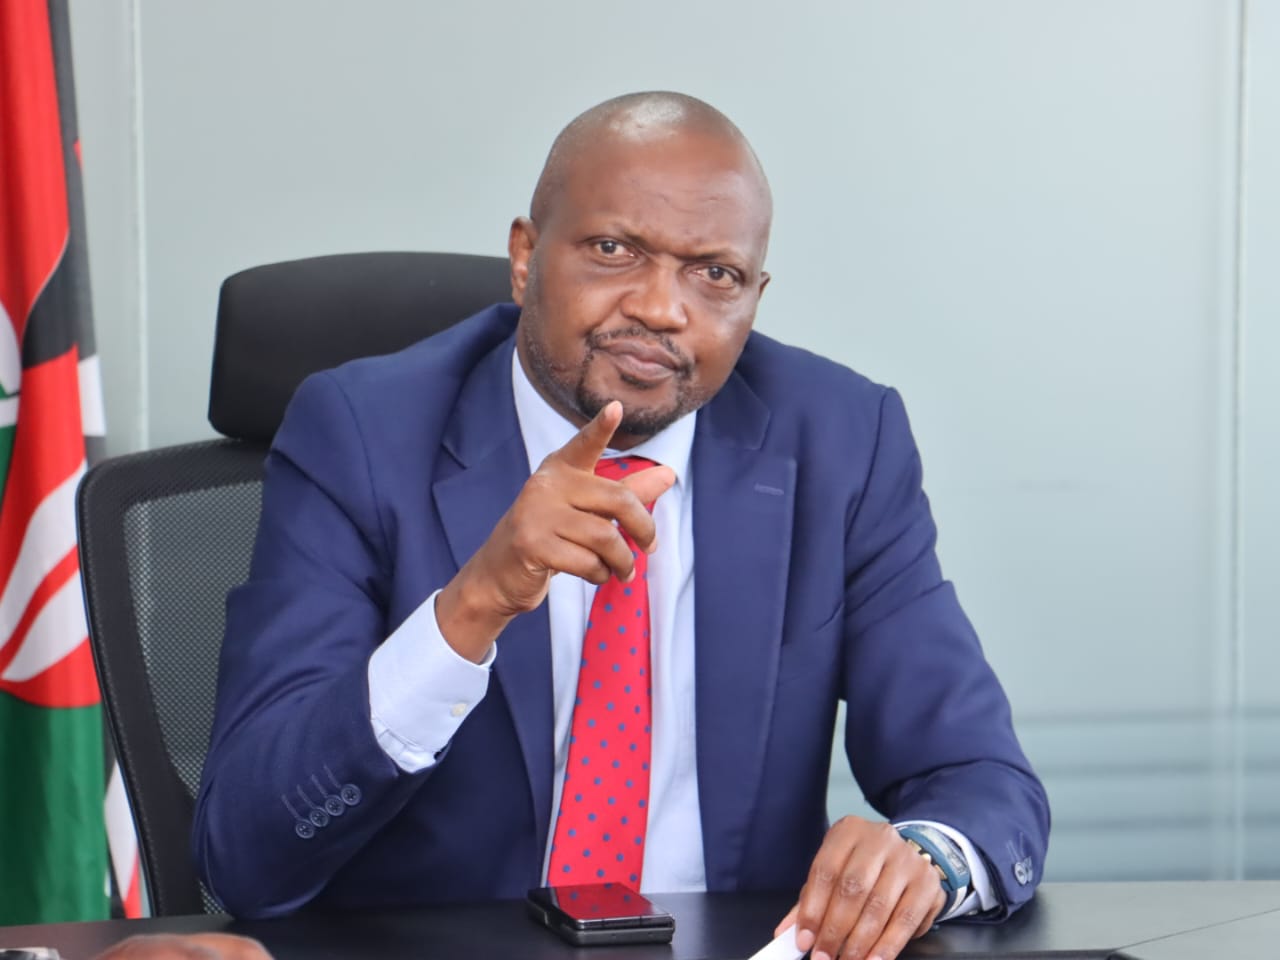 Cabinet Secretary for Trade and Industry Moses Kuria.